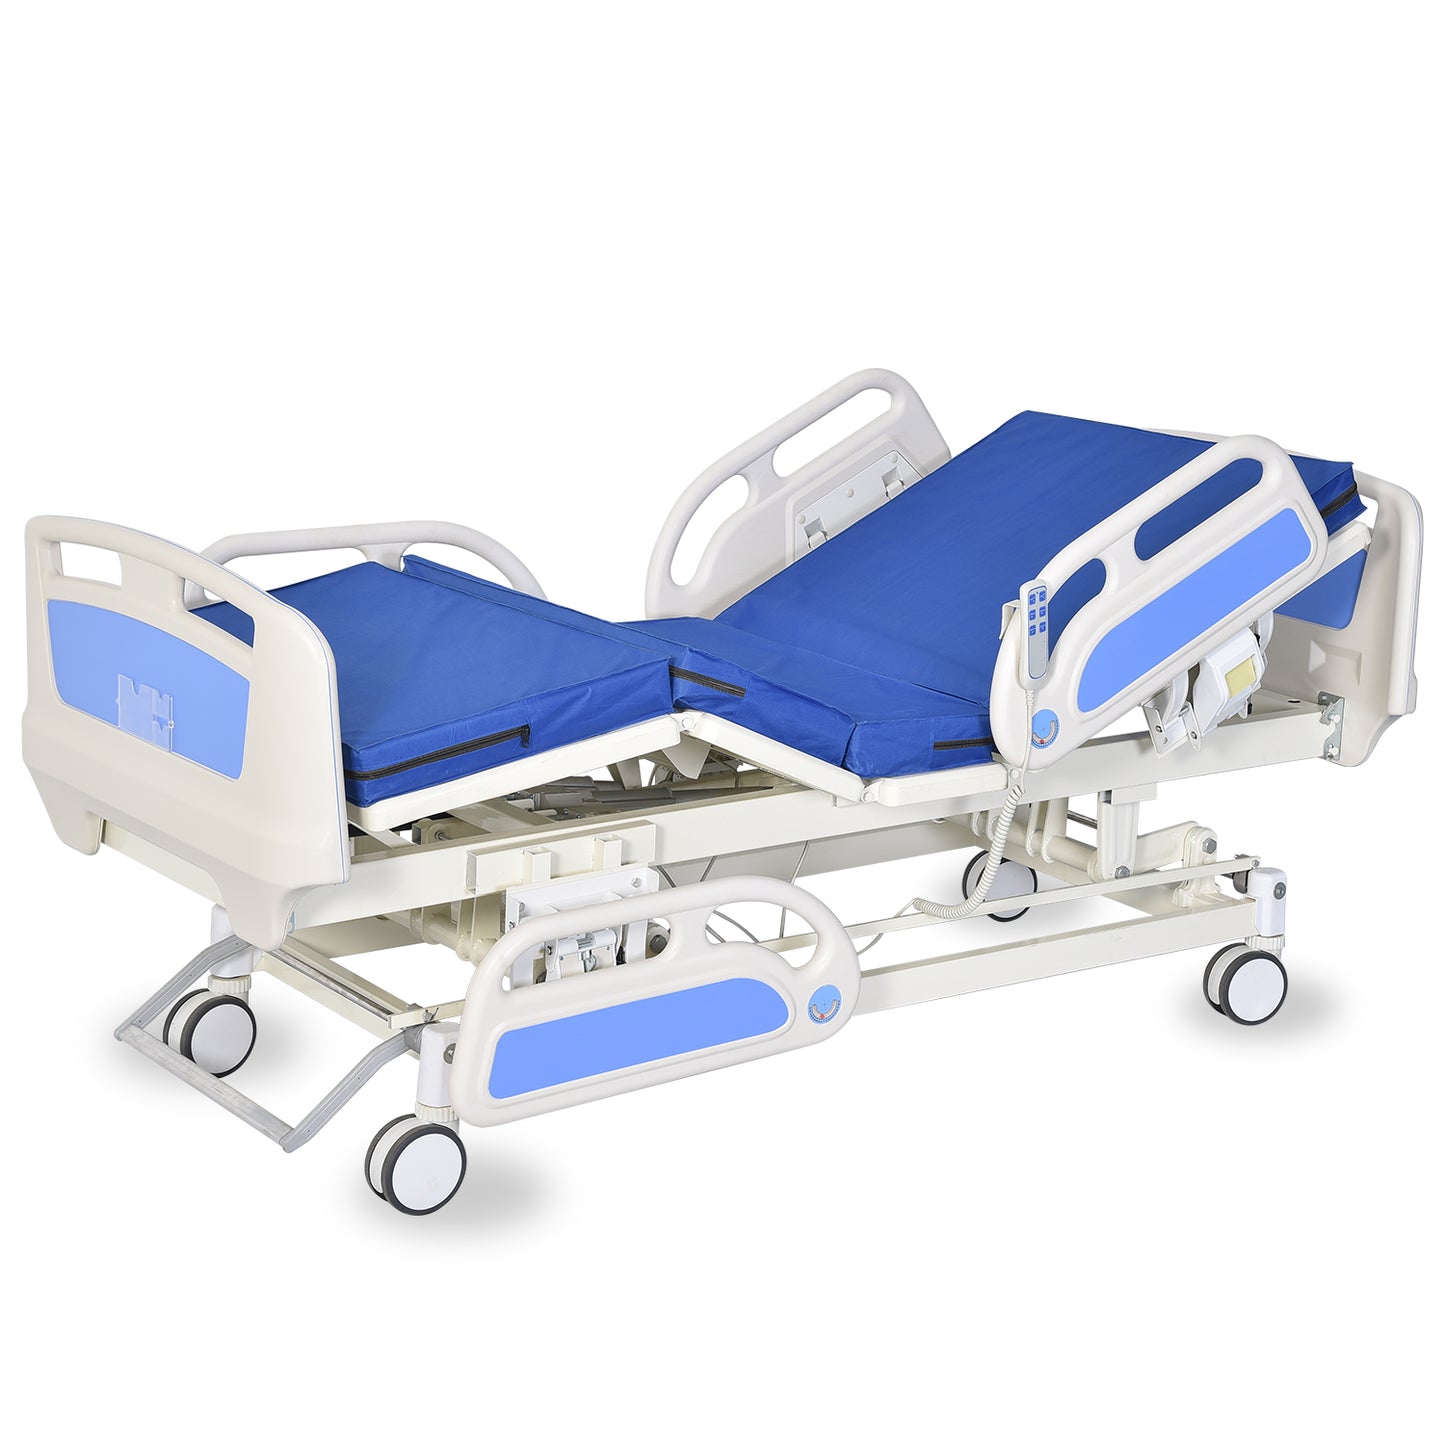 3-Function Remote Control Electric Hospital Bed w/ Full-Length ABS Guardrails, S/S IV Pole, Wash Basin, Bedpan, and Removable Table